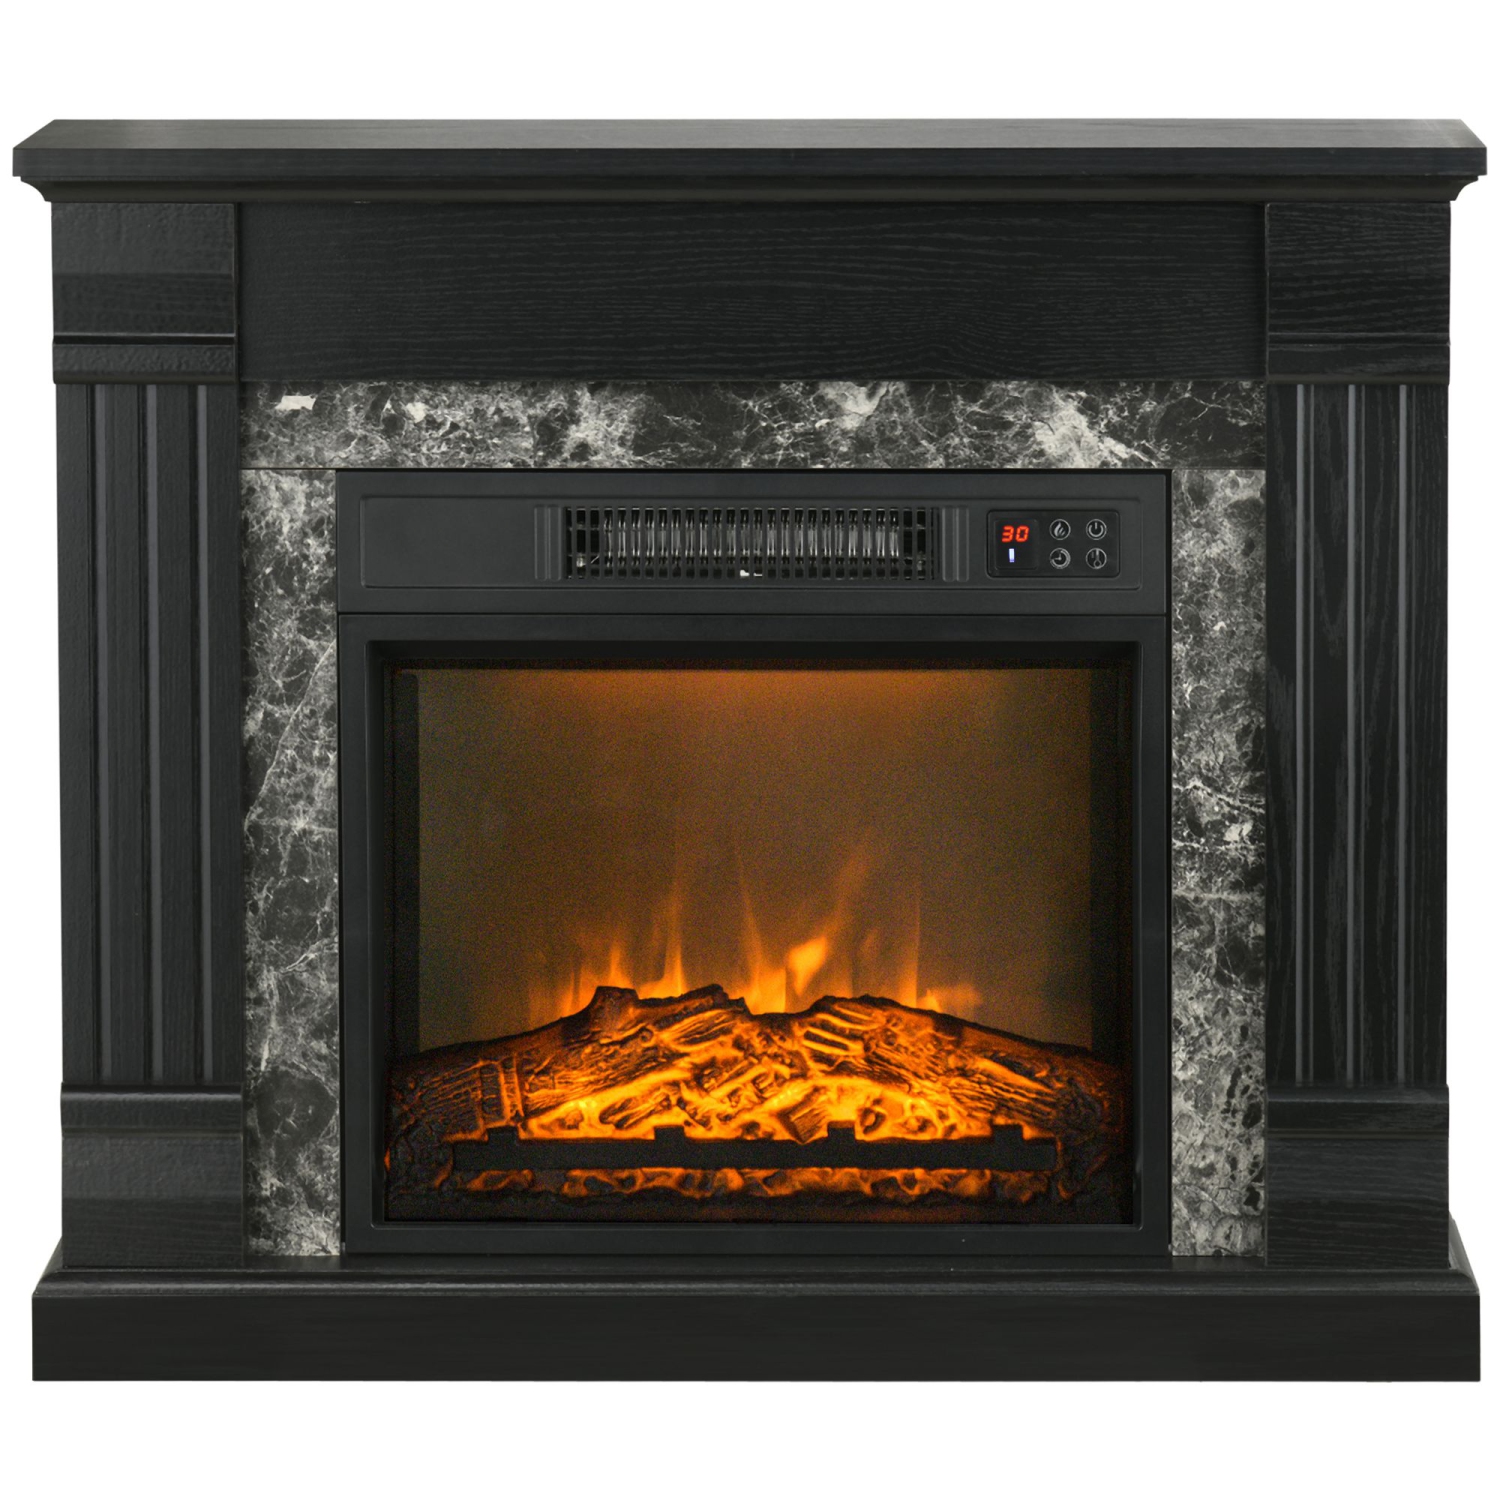 HOMCOM Electric Fireplace Mantel Wood Surround, Freestanding Fireplace Heater with Realistic Flame, Adjustable Temperature, Timer, Overheating Protection, and Remote Control, Black